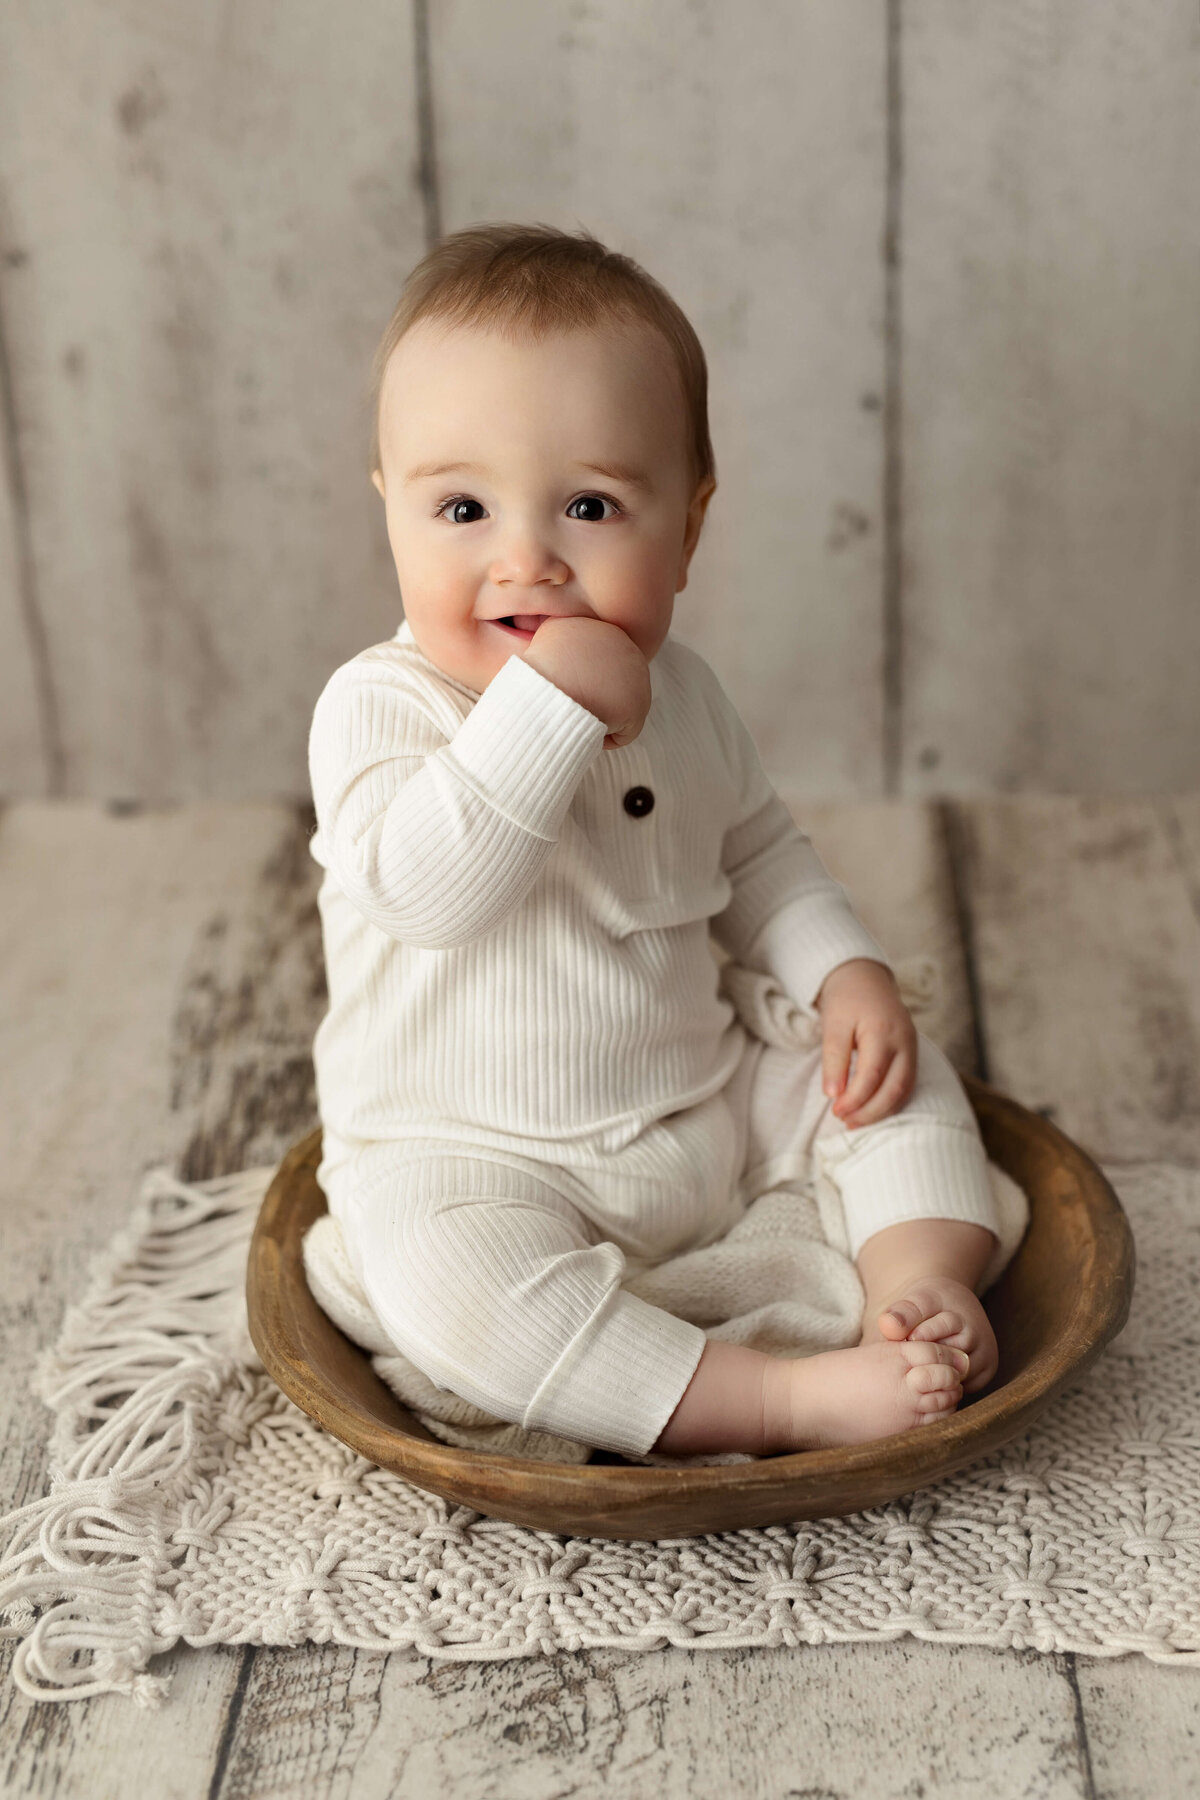 8 month old baby in a white onesie sitting in a wooden bowl on a white wooden background during a toddler milestone session